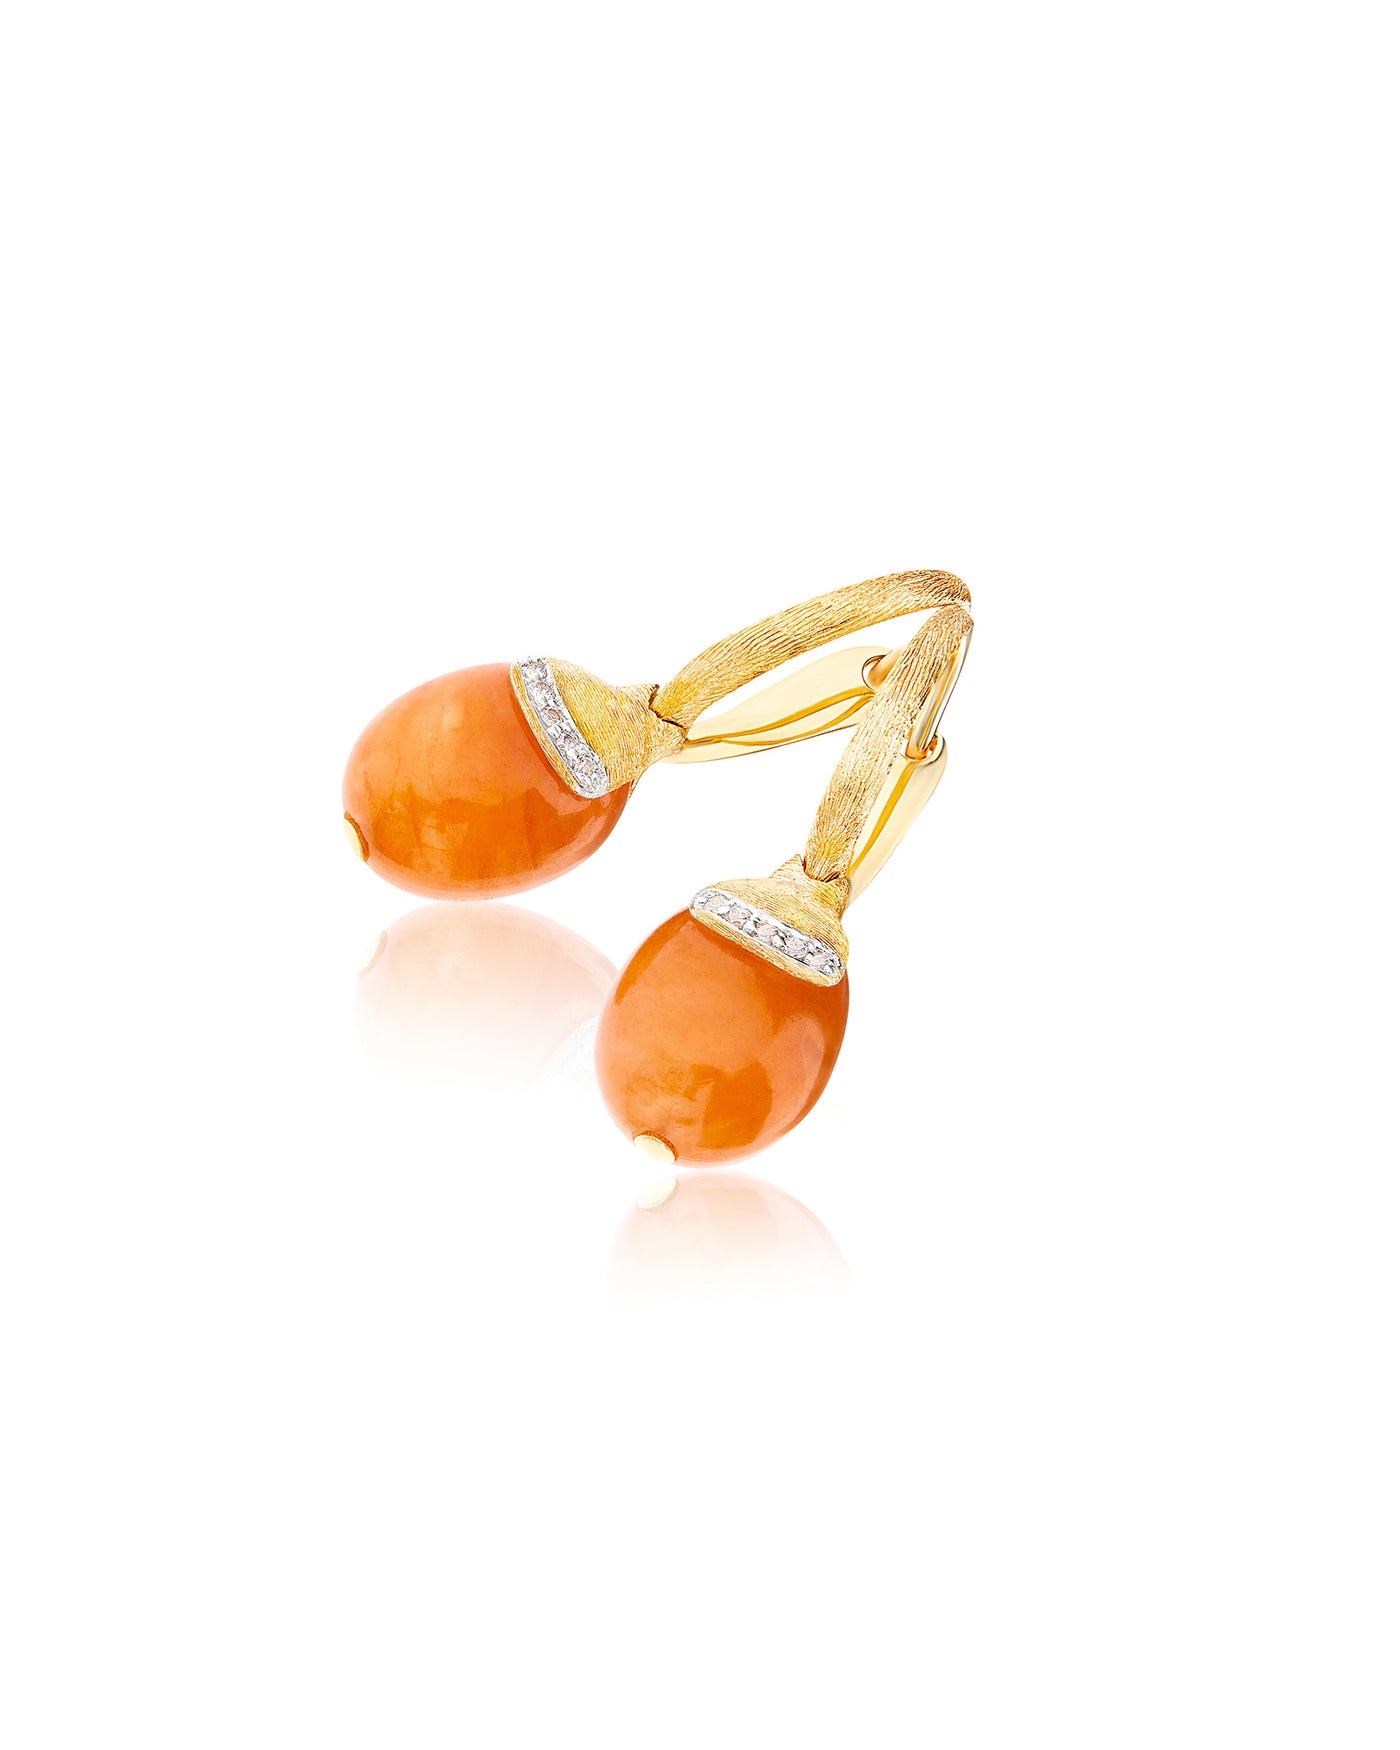 "Petra" ciliegine gold and orange aventurine ball drop earrings with diamonds details (small)